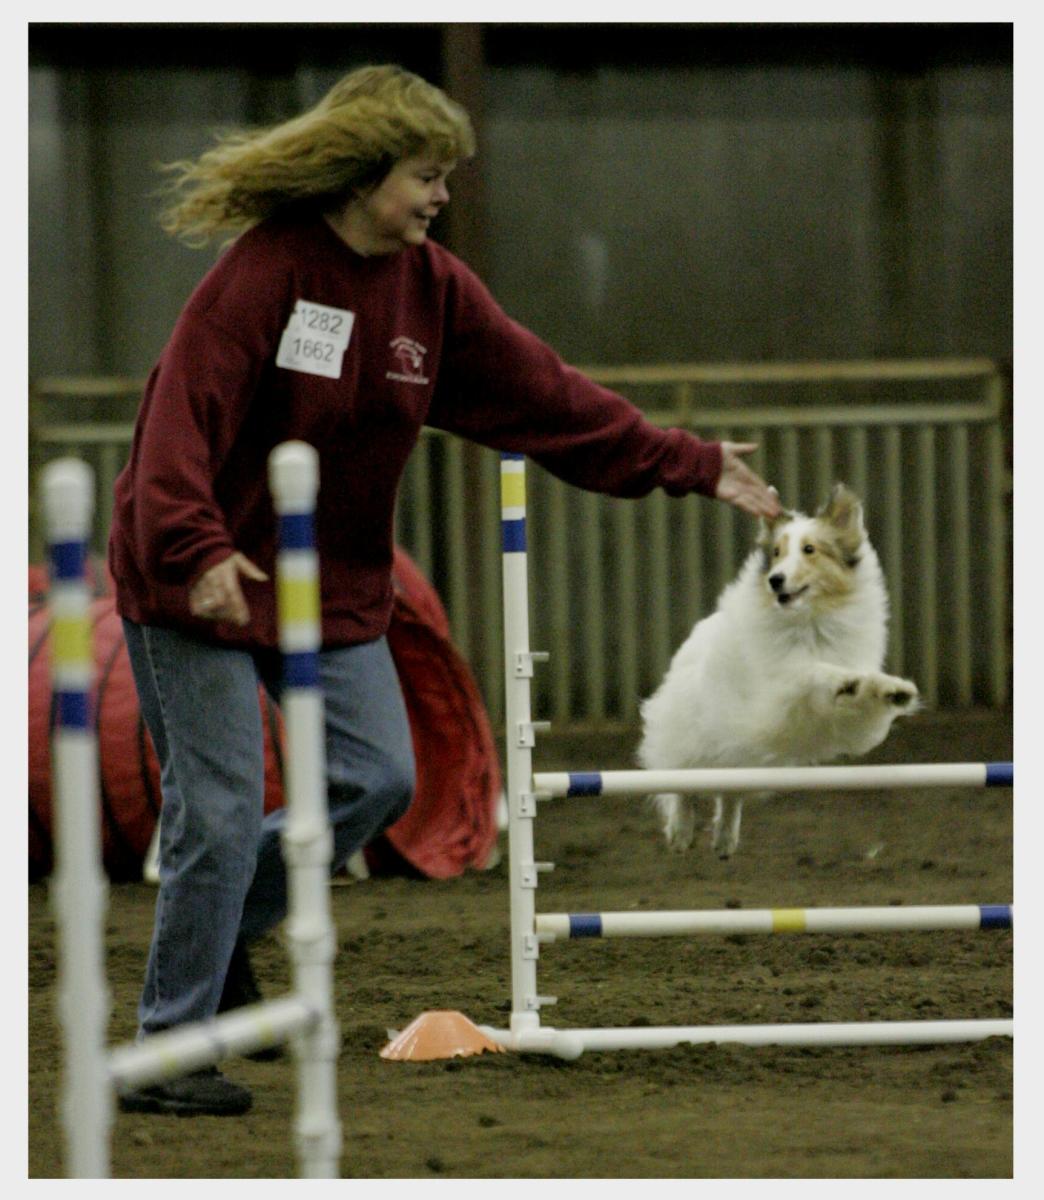 getting-lost-on-course-tips-on-how-to-a-dog-agility-course